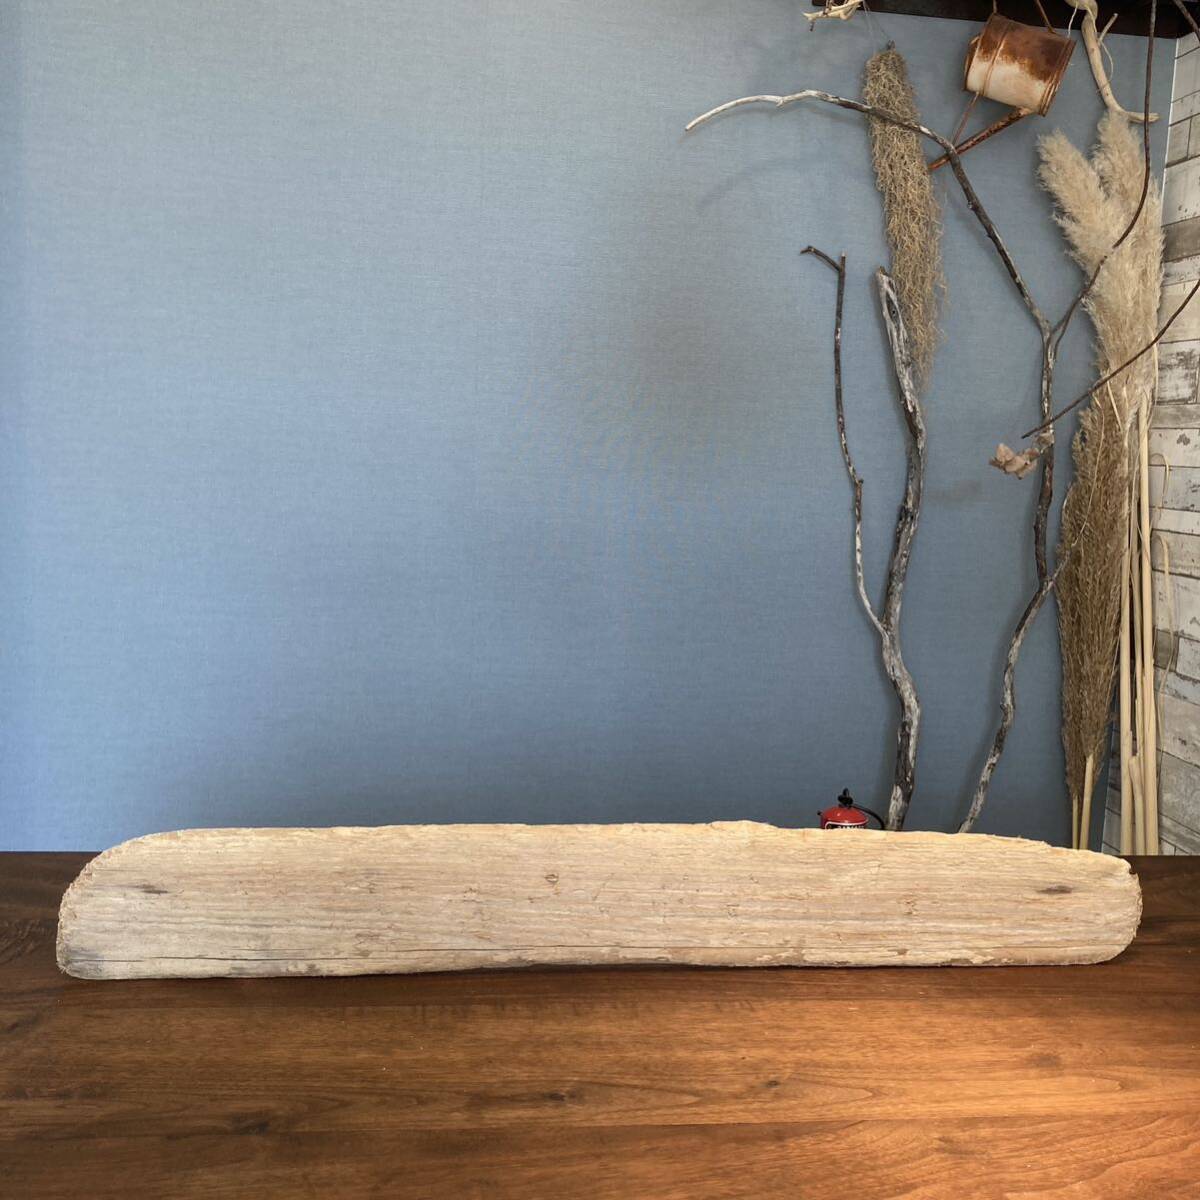 12.How about using old boards as signboards, Driftwood...natural product, interior, handmade works, interior, miscellaneous goods, ornament, object